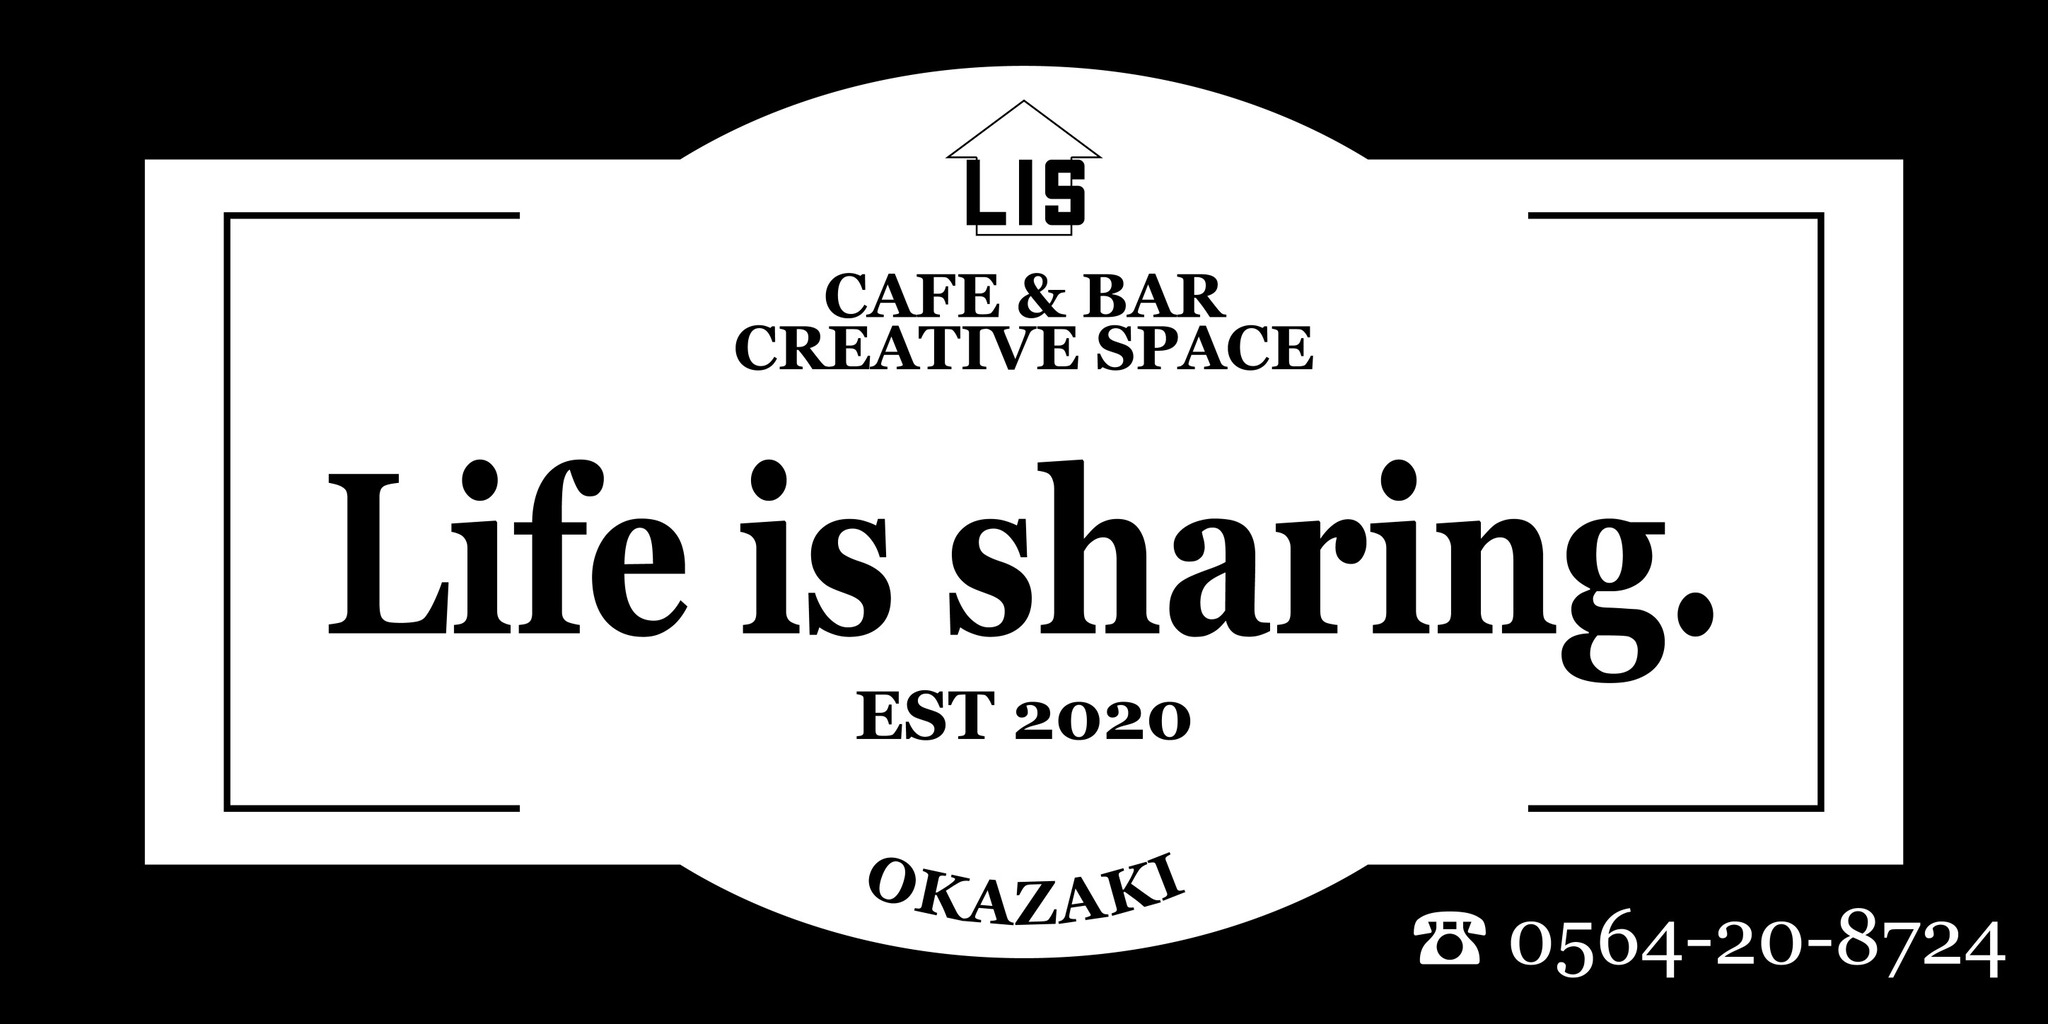 Life is sharing.